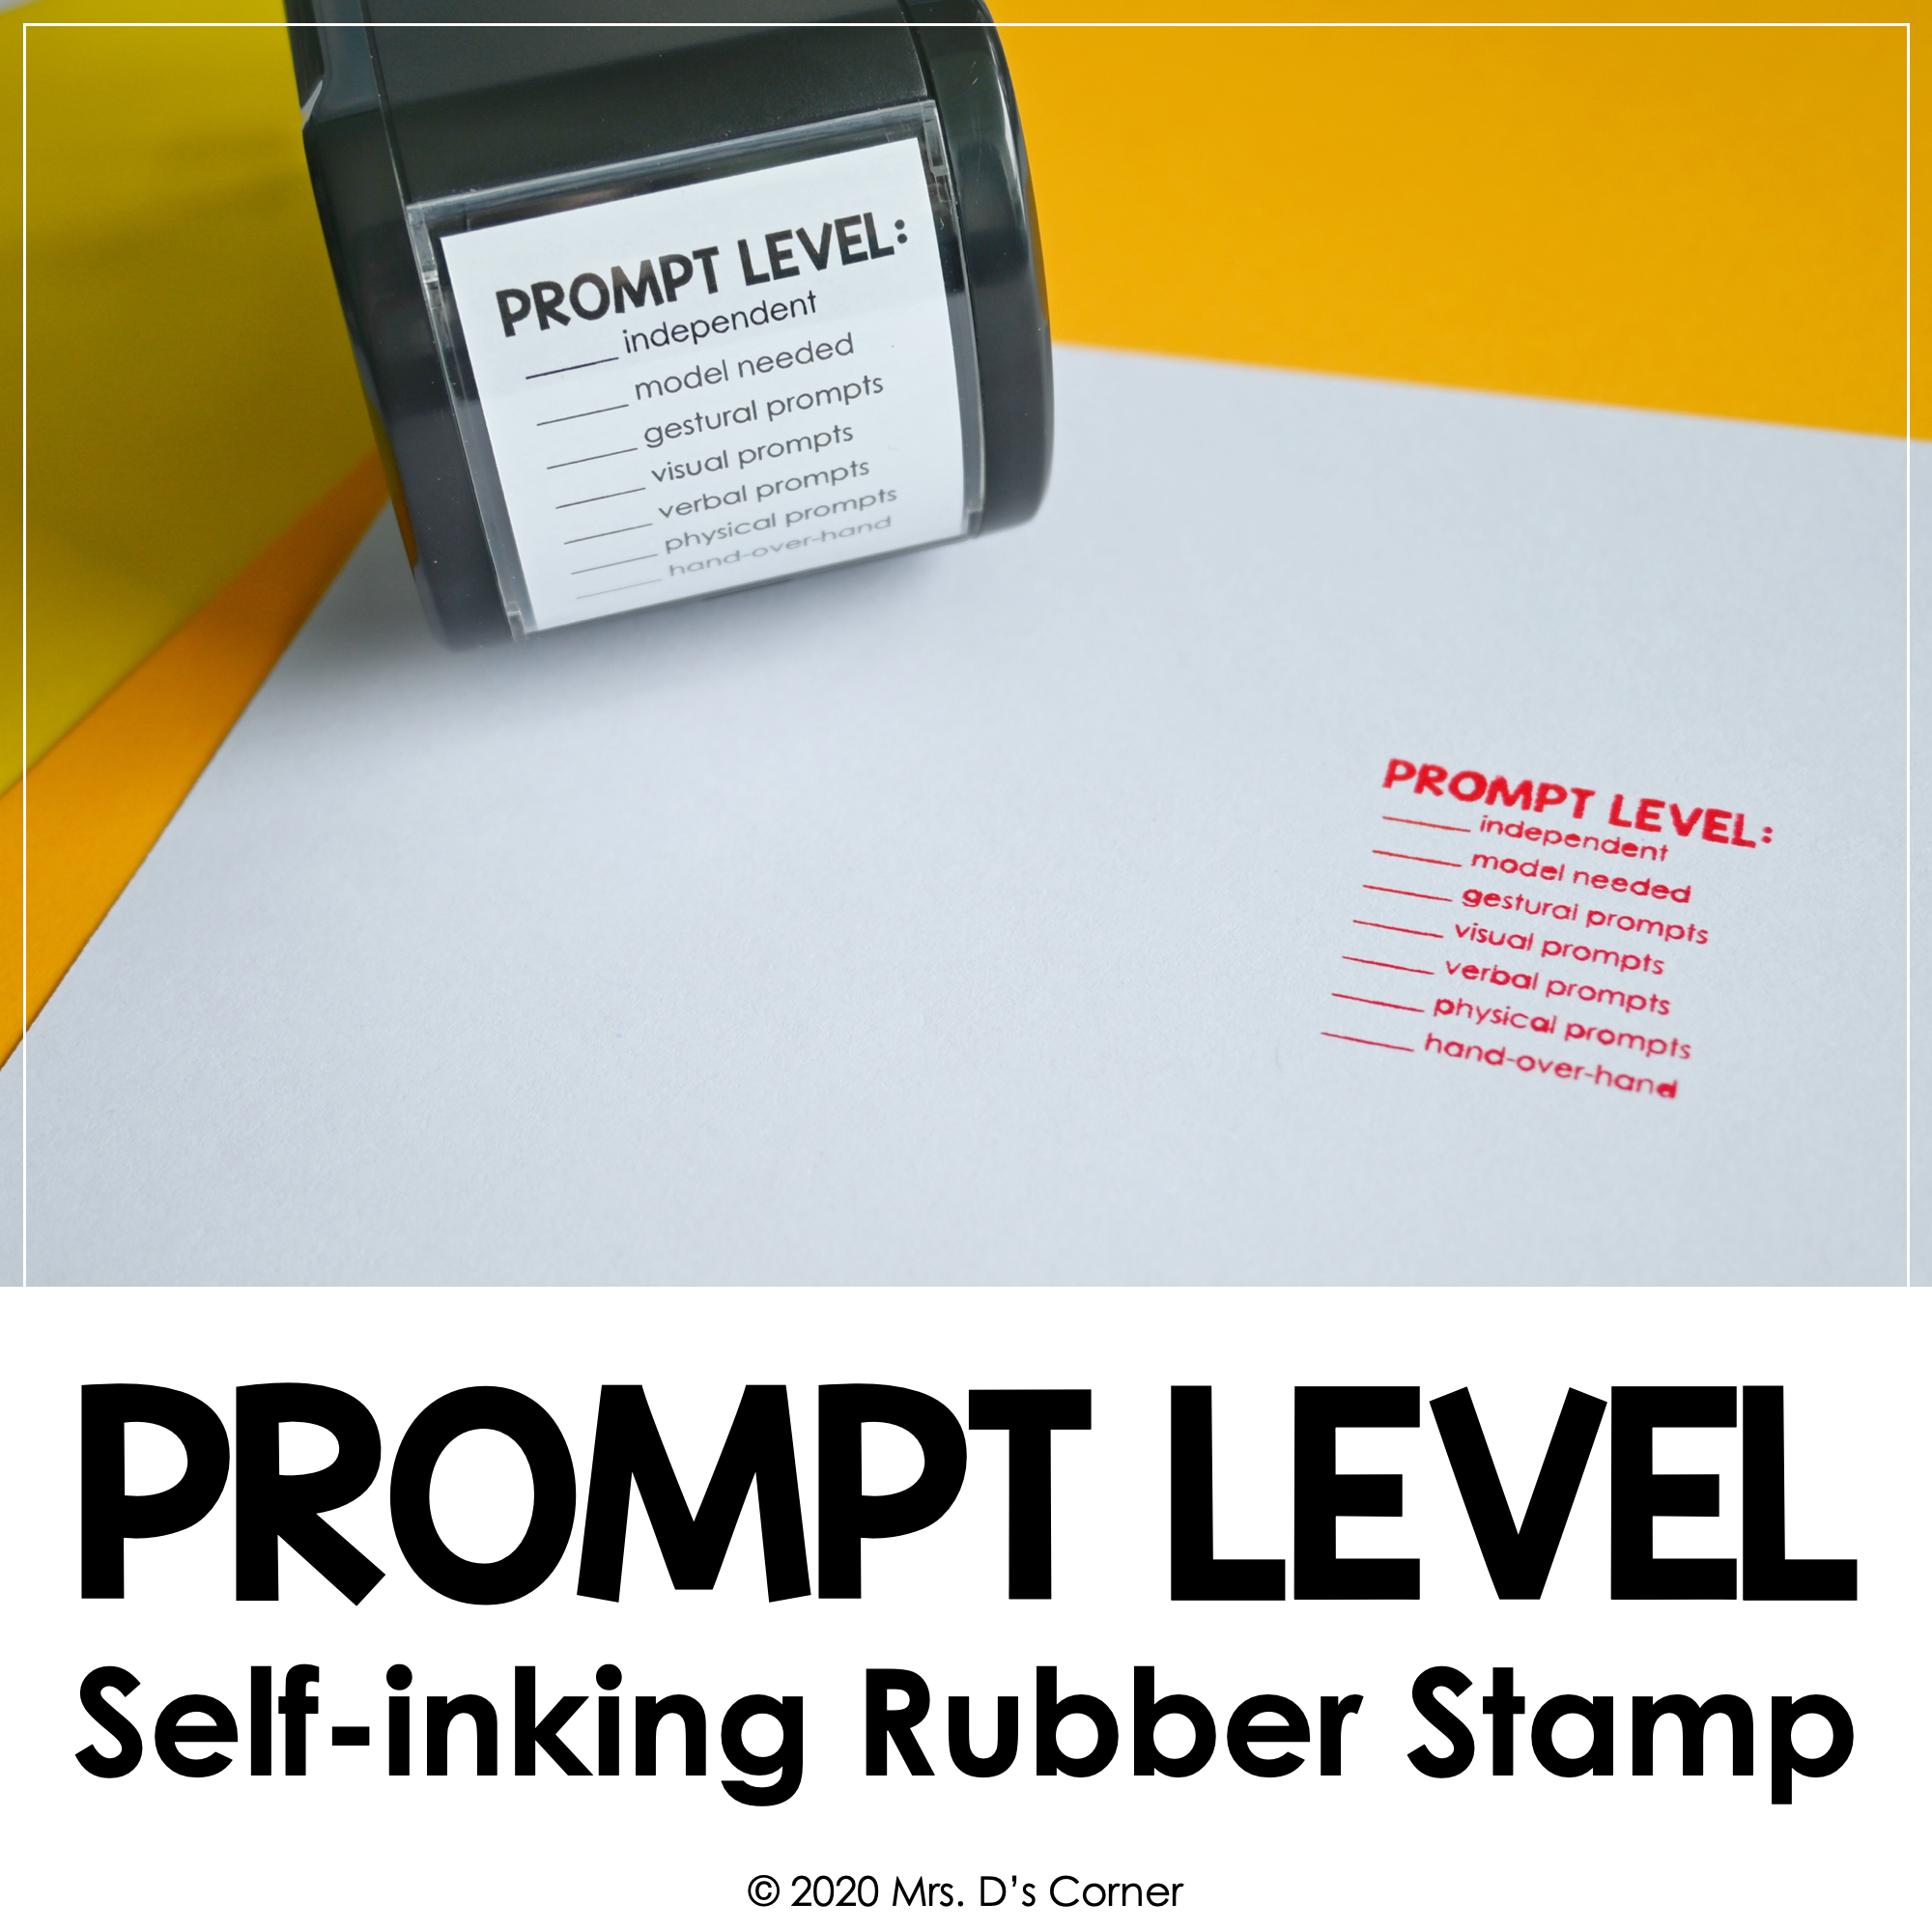 Self-Inking Address Stamp  Paw Print Stamp - Simply Stamps